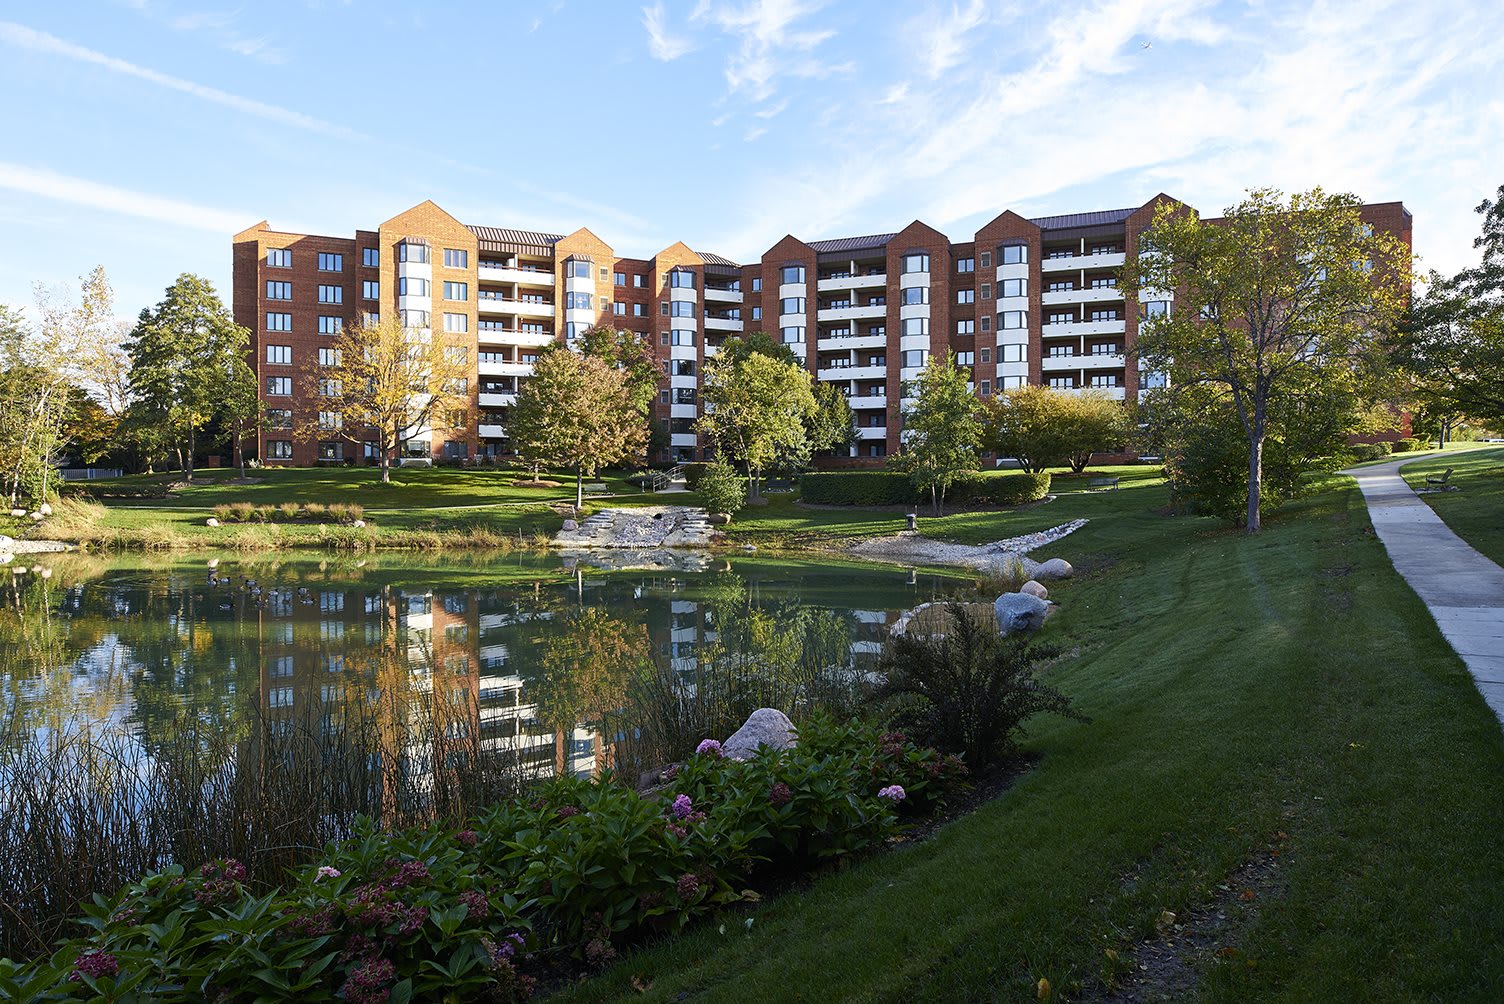 Beacon Hill a CCRC, Independent Living, Lombard, IL 60148